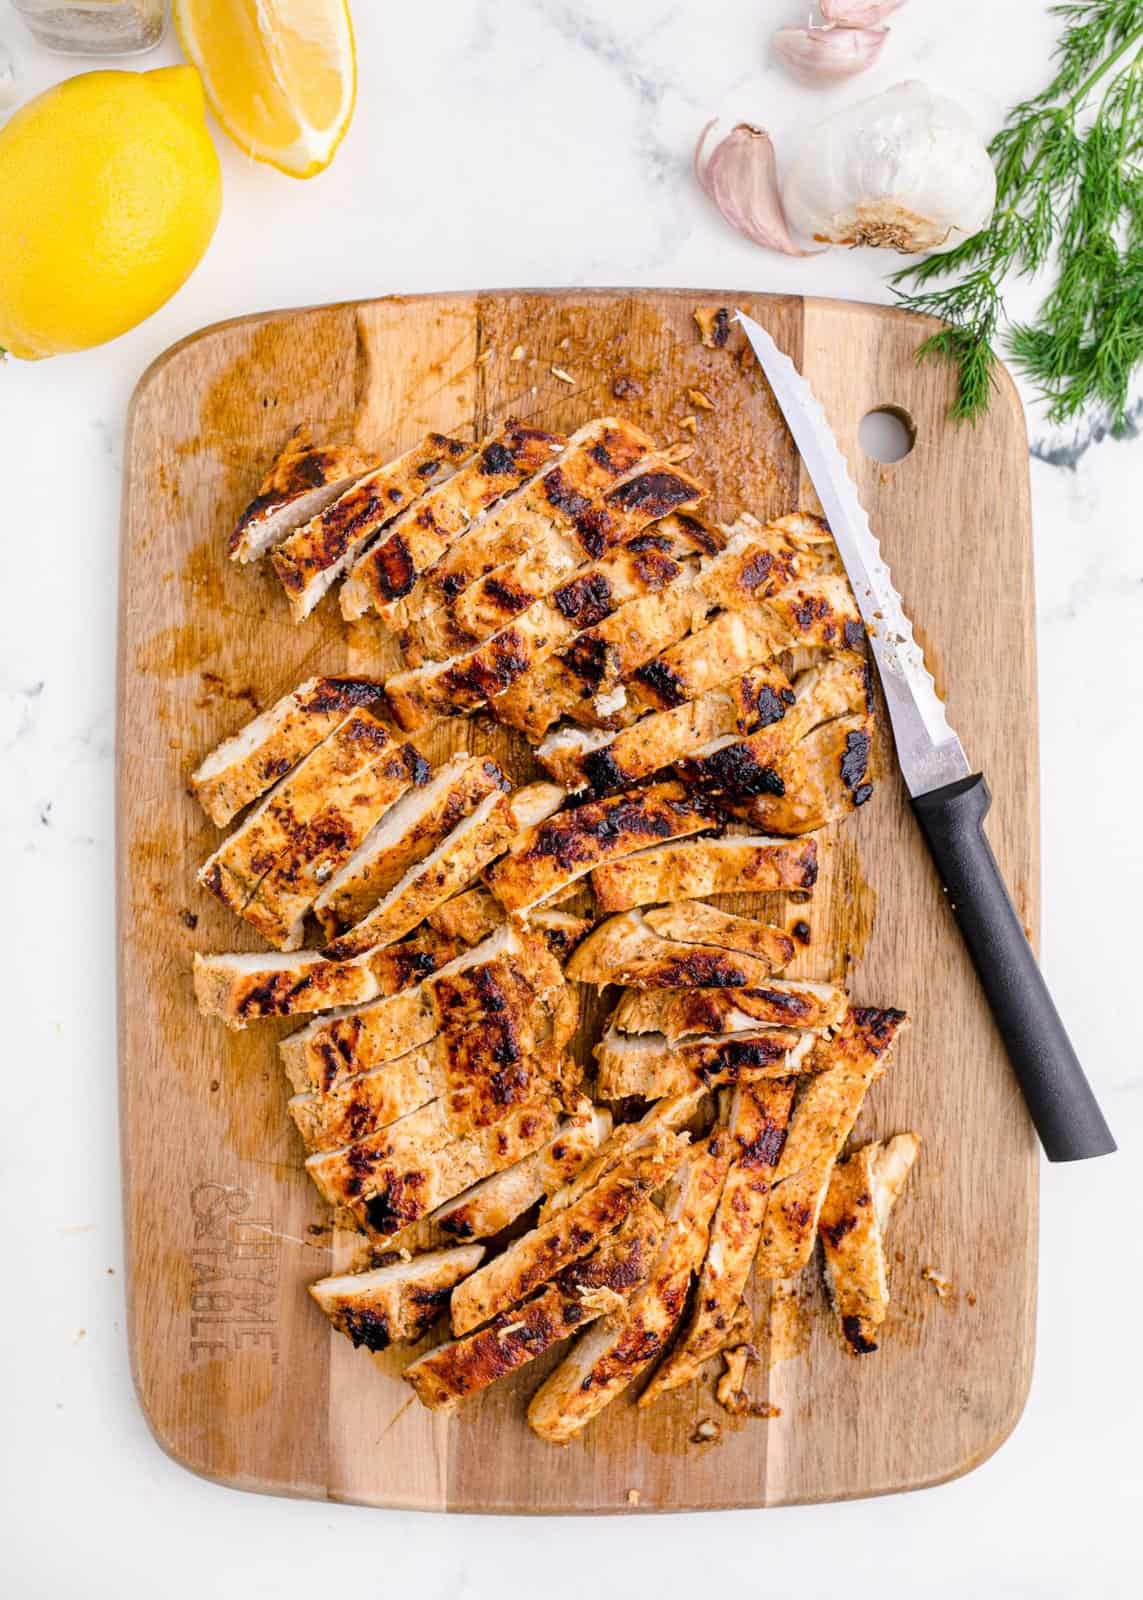 Cut up cooked chicken on cutting board.